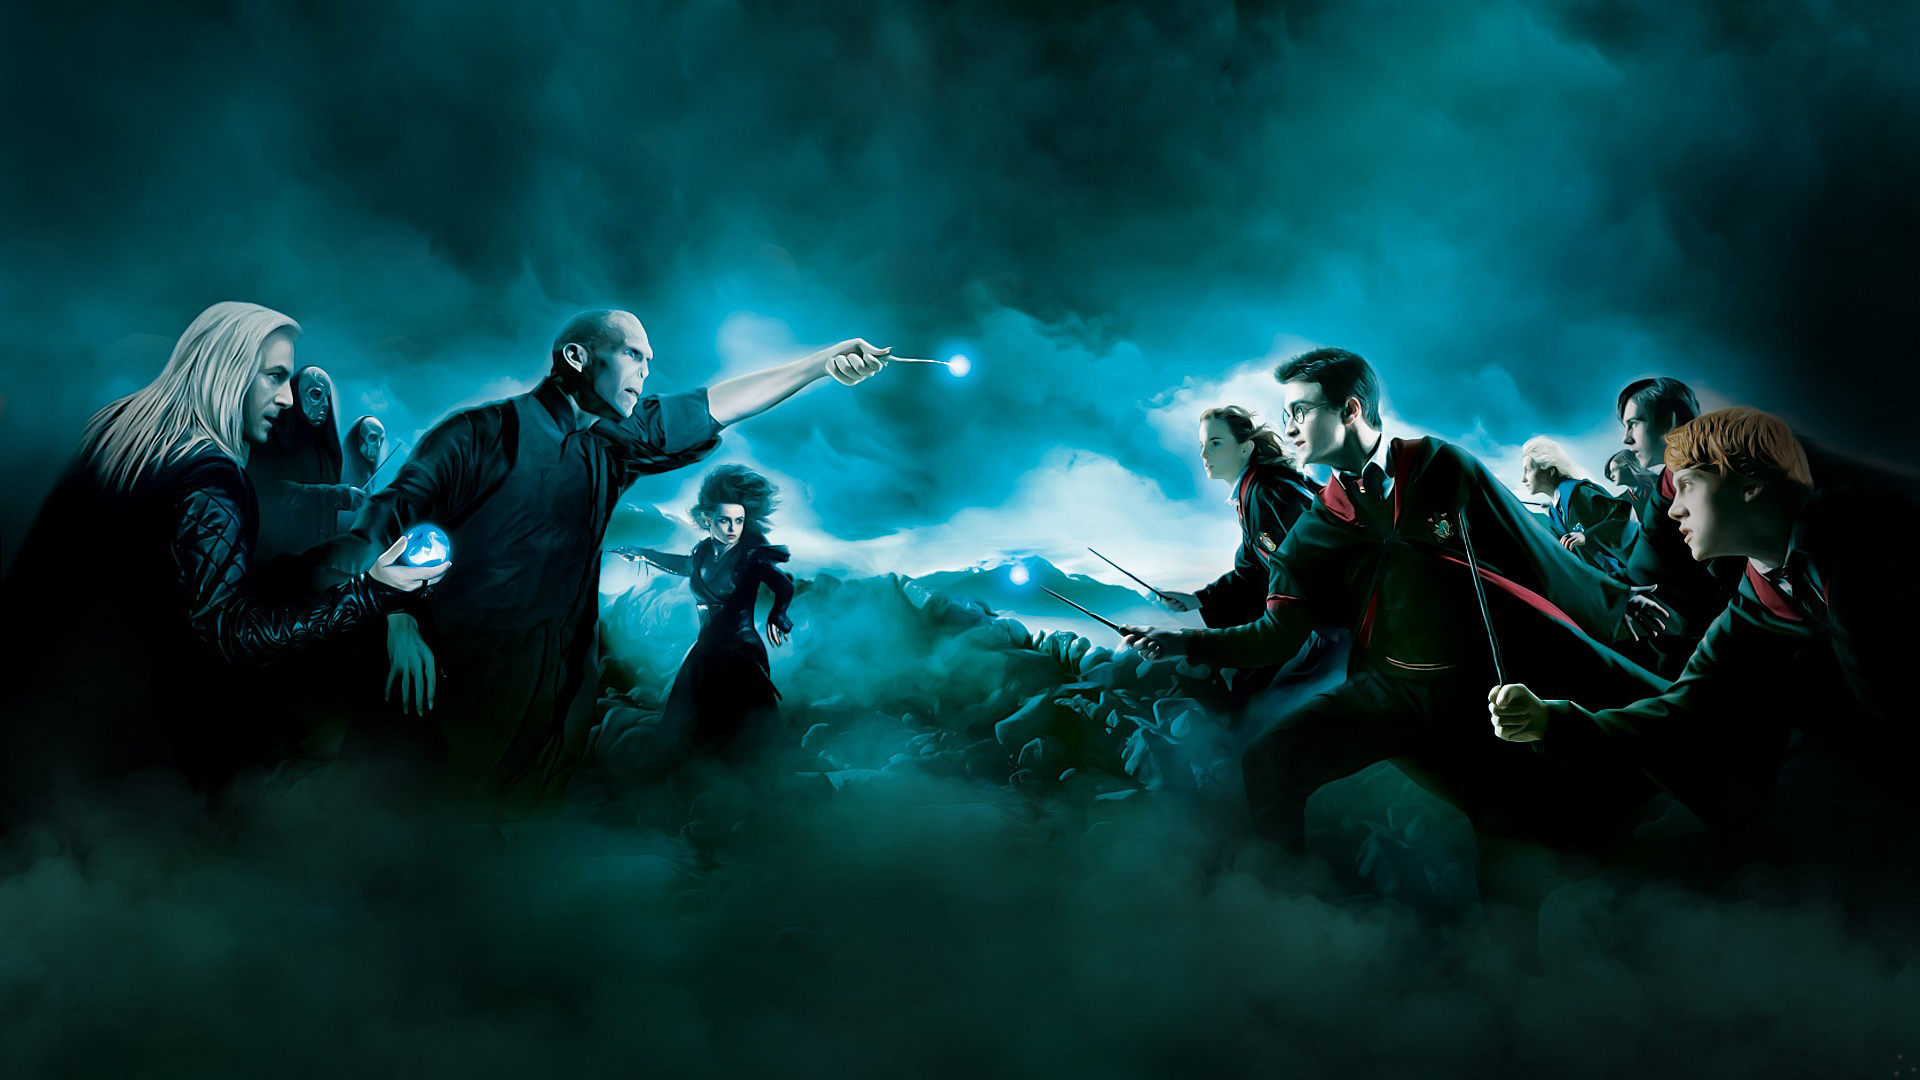 The Dumbledore's Army: United against Voldemort 2